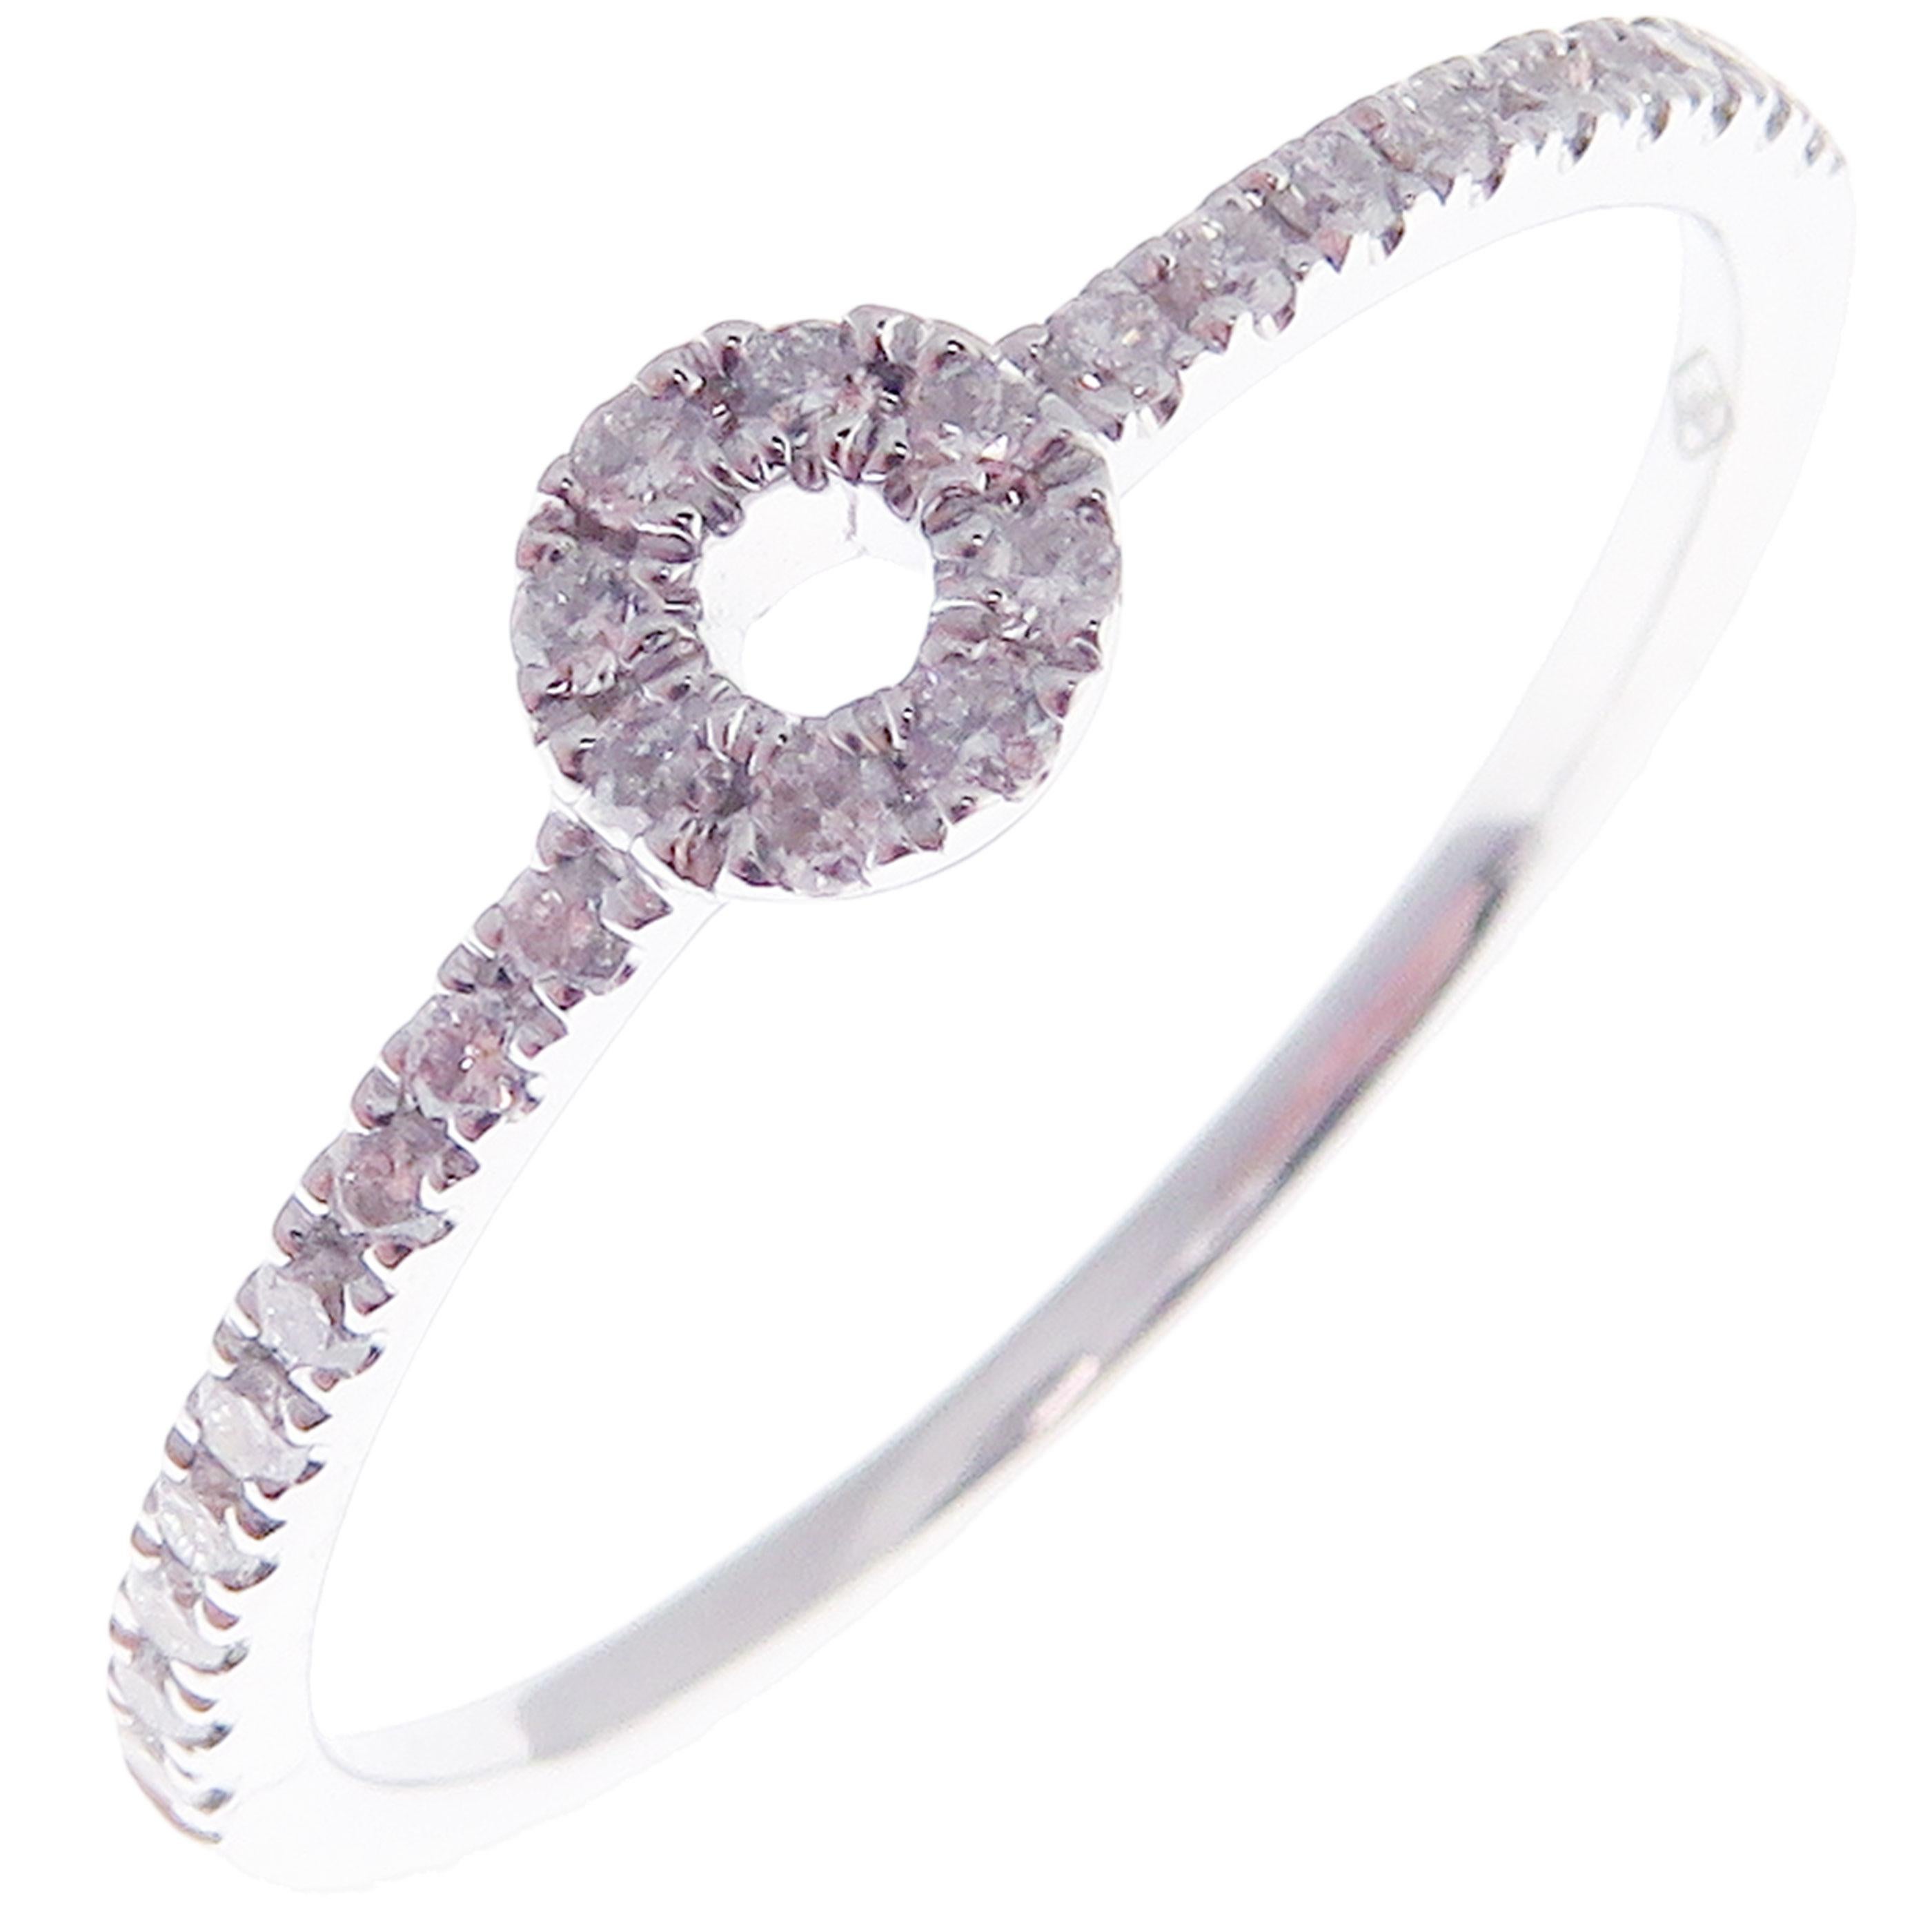 This trendy simple stackable ring is crafted in 18-karat white gold, featuring 26 round white diamonds totaling of 0.19 carats.
Approximate total weight 1.30 grams.
Standard Ring size 7
SI-G Quality natural white diamonds.